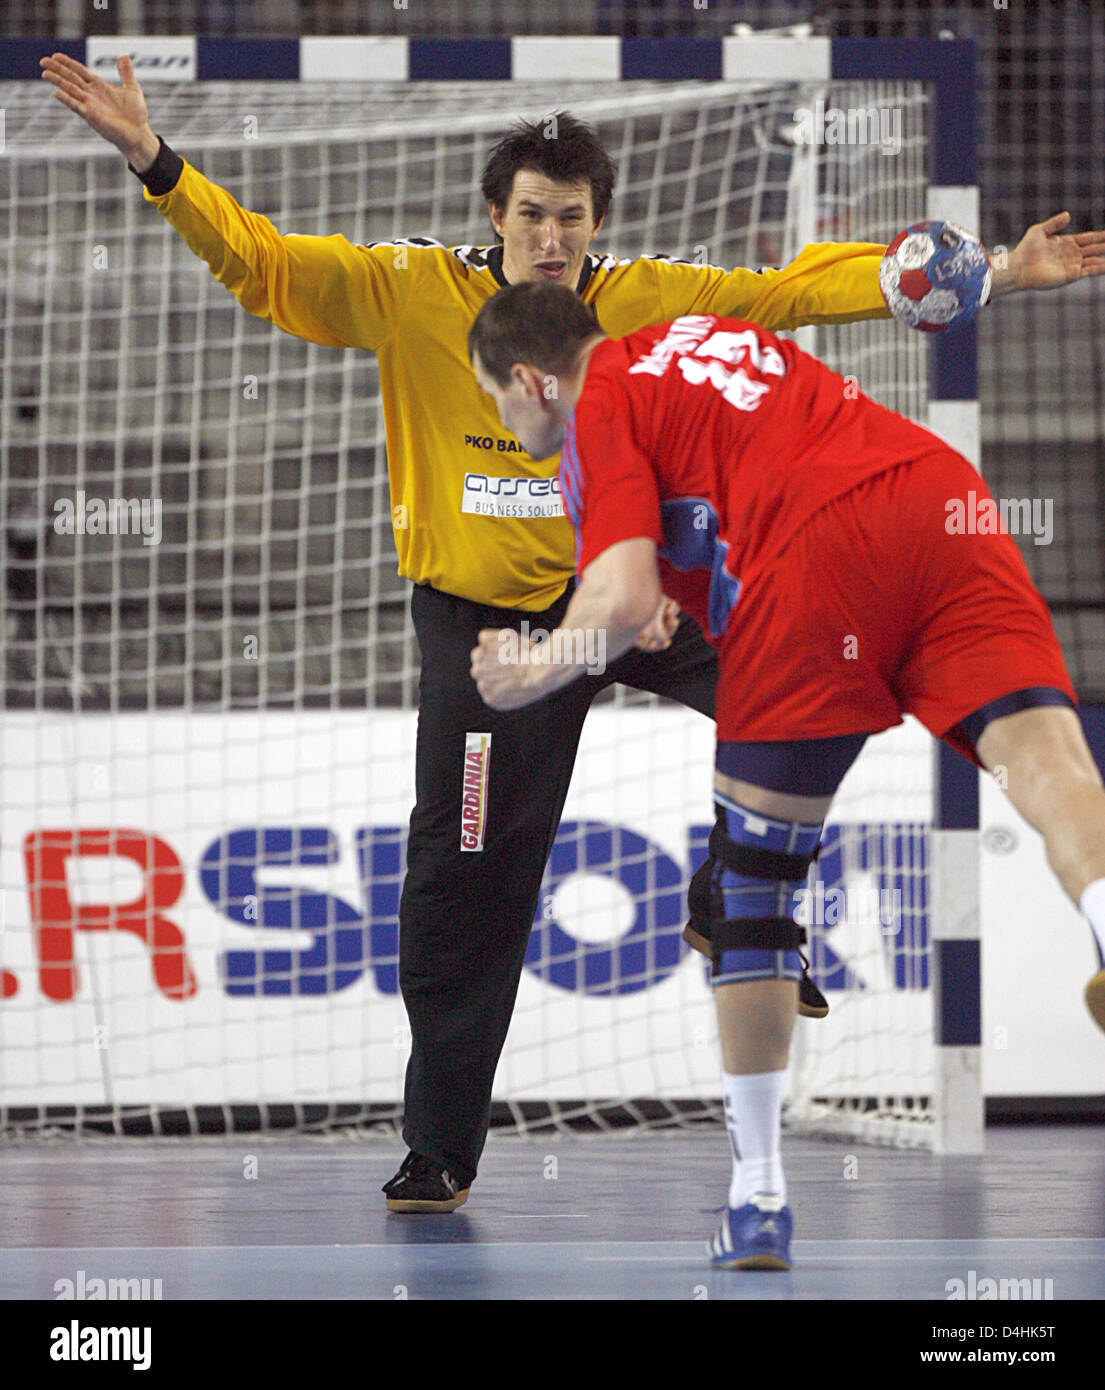 Polish goalkeeper Slawomir Szmal (L) and Russia?s Alexy Rastvortsev seen in action during a penalty try in the Handball World Championships, Group C match Russia vs Poland in Varazdin, Croatia, 18 January 2009. Poland won 24-22. Photo: Jens Wolf Stock Photo